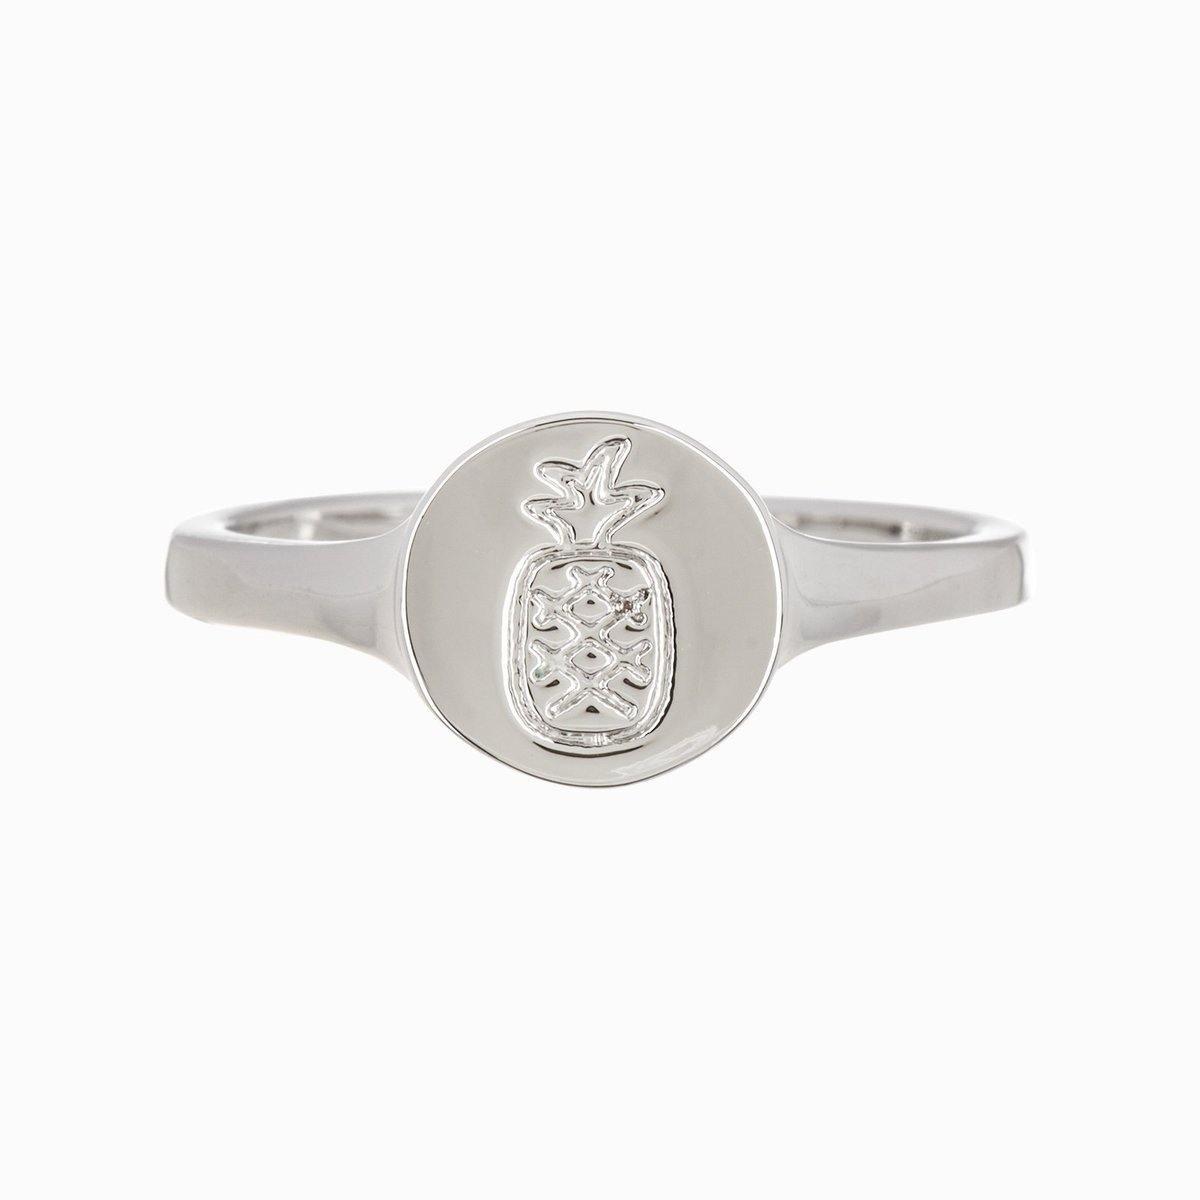 Pineapple Coin Ring - The Salty Mare